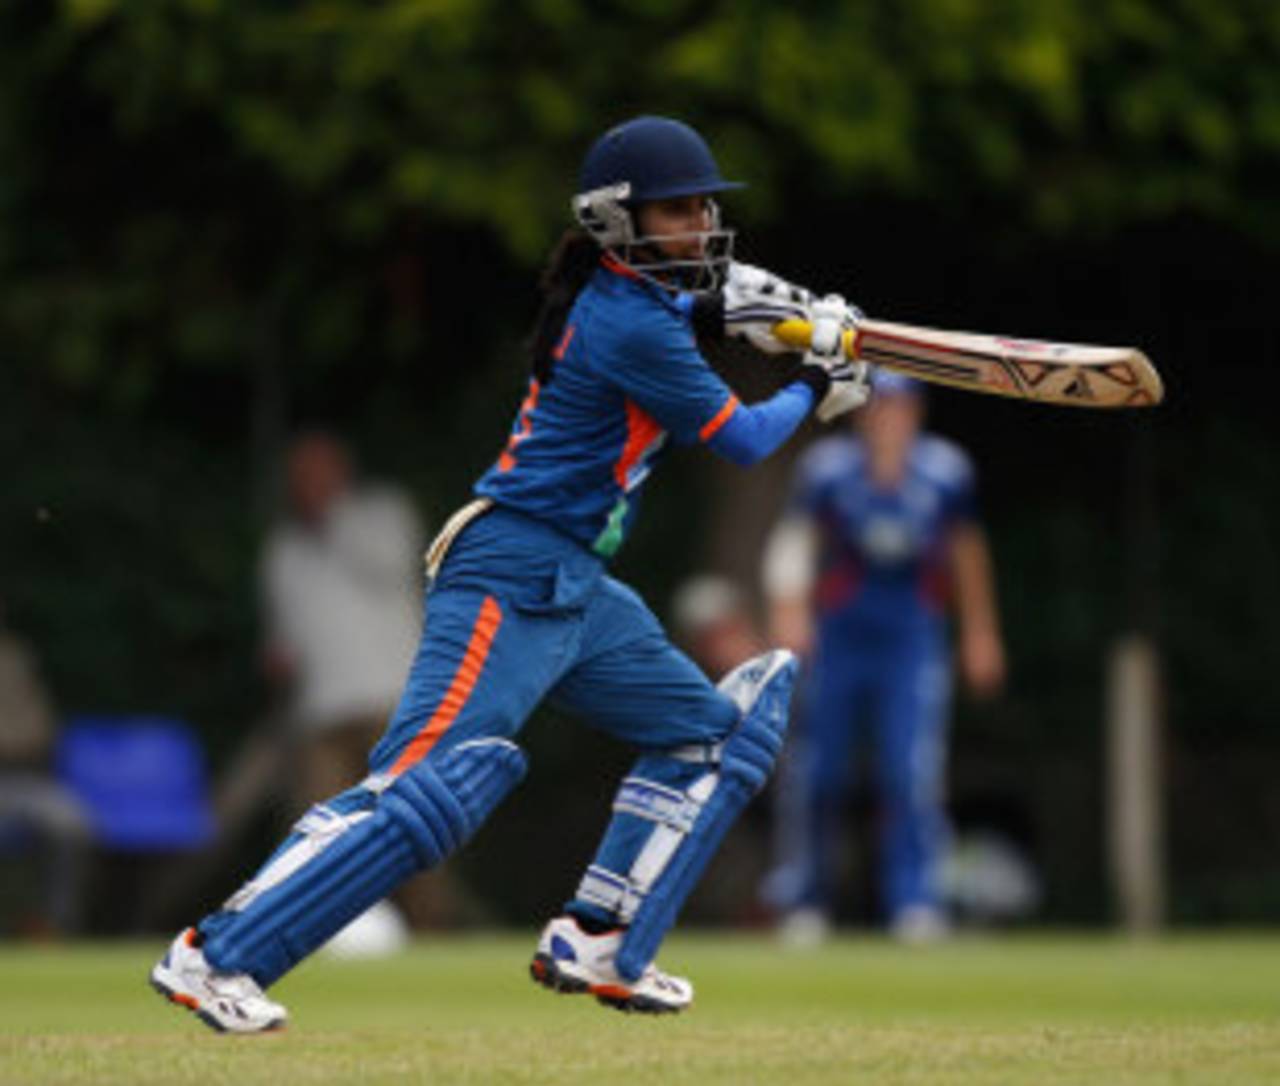 Clare Connor said more of the Indian public need to know about India's female cricketers like Mithali Raj&nbsp;&nbsp;&bull;&nbsp;&nbsp;Getty Images